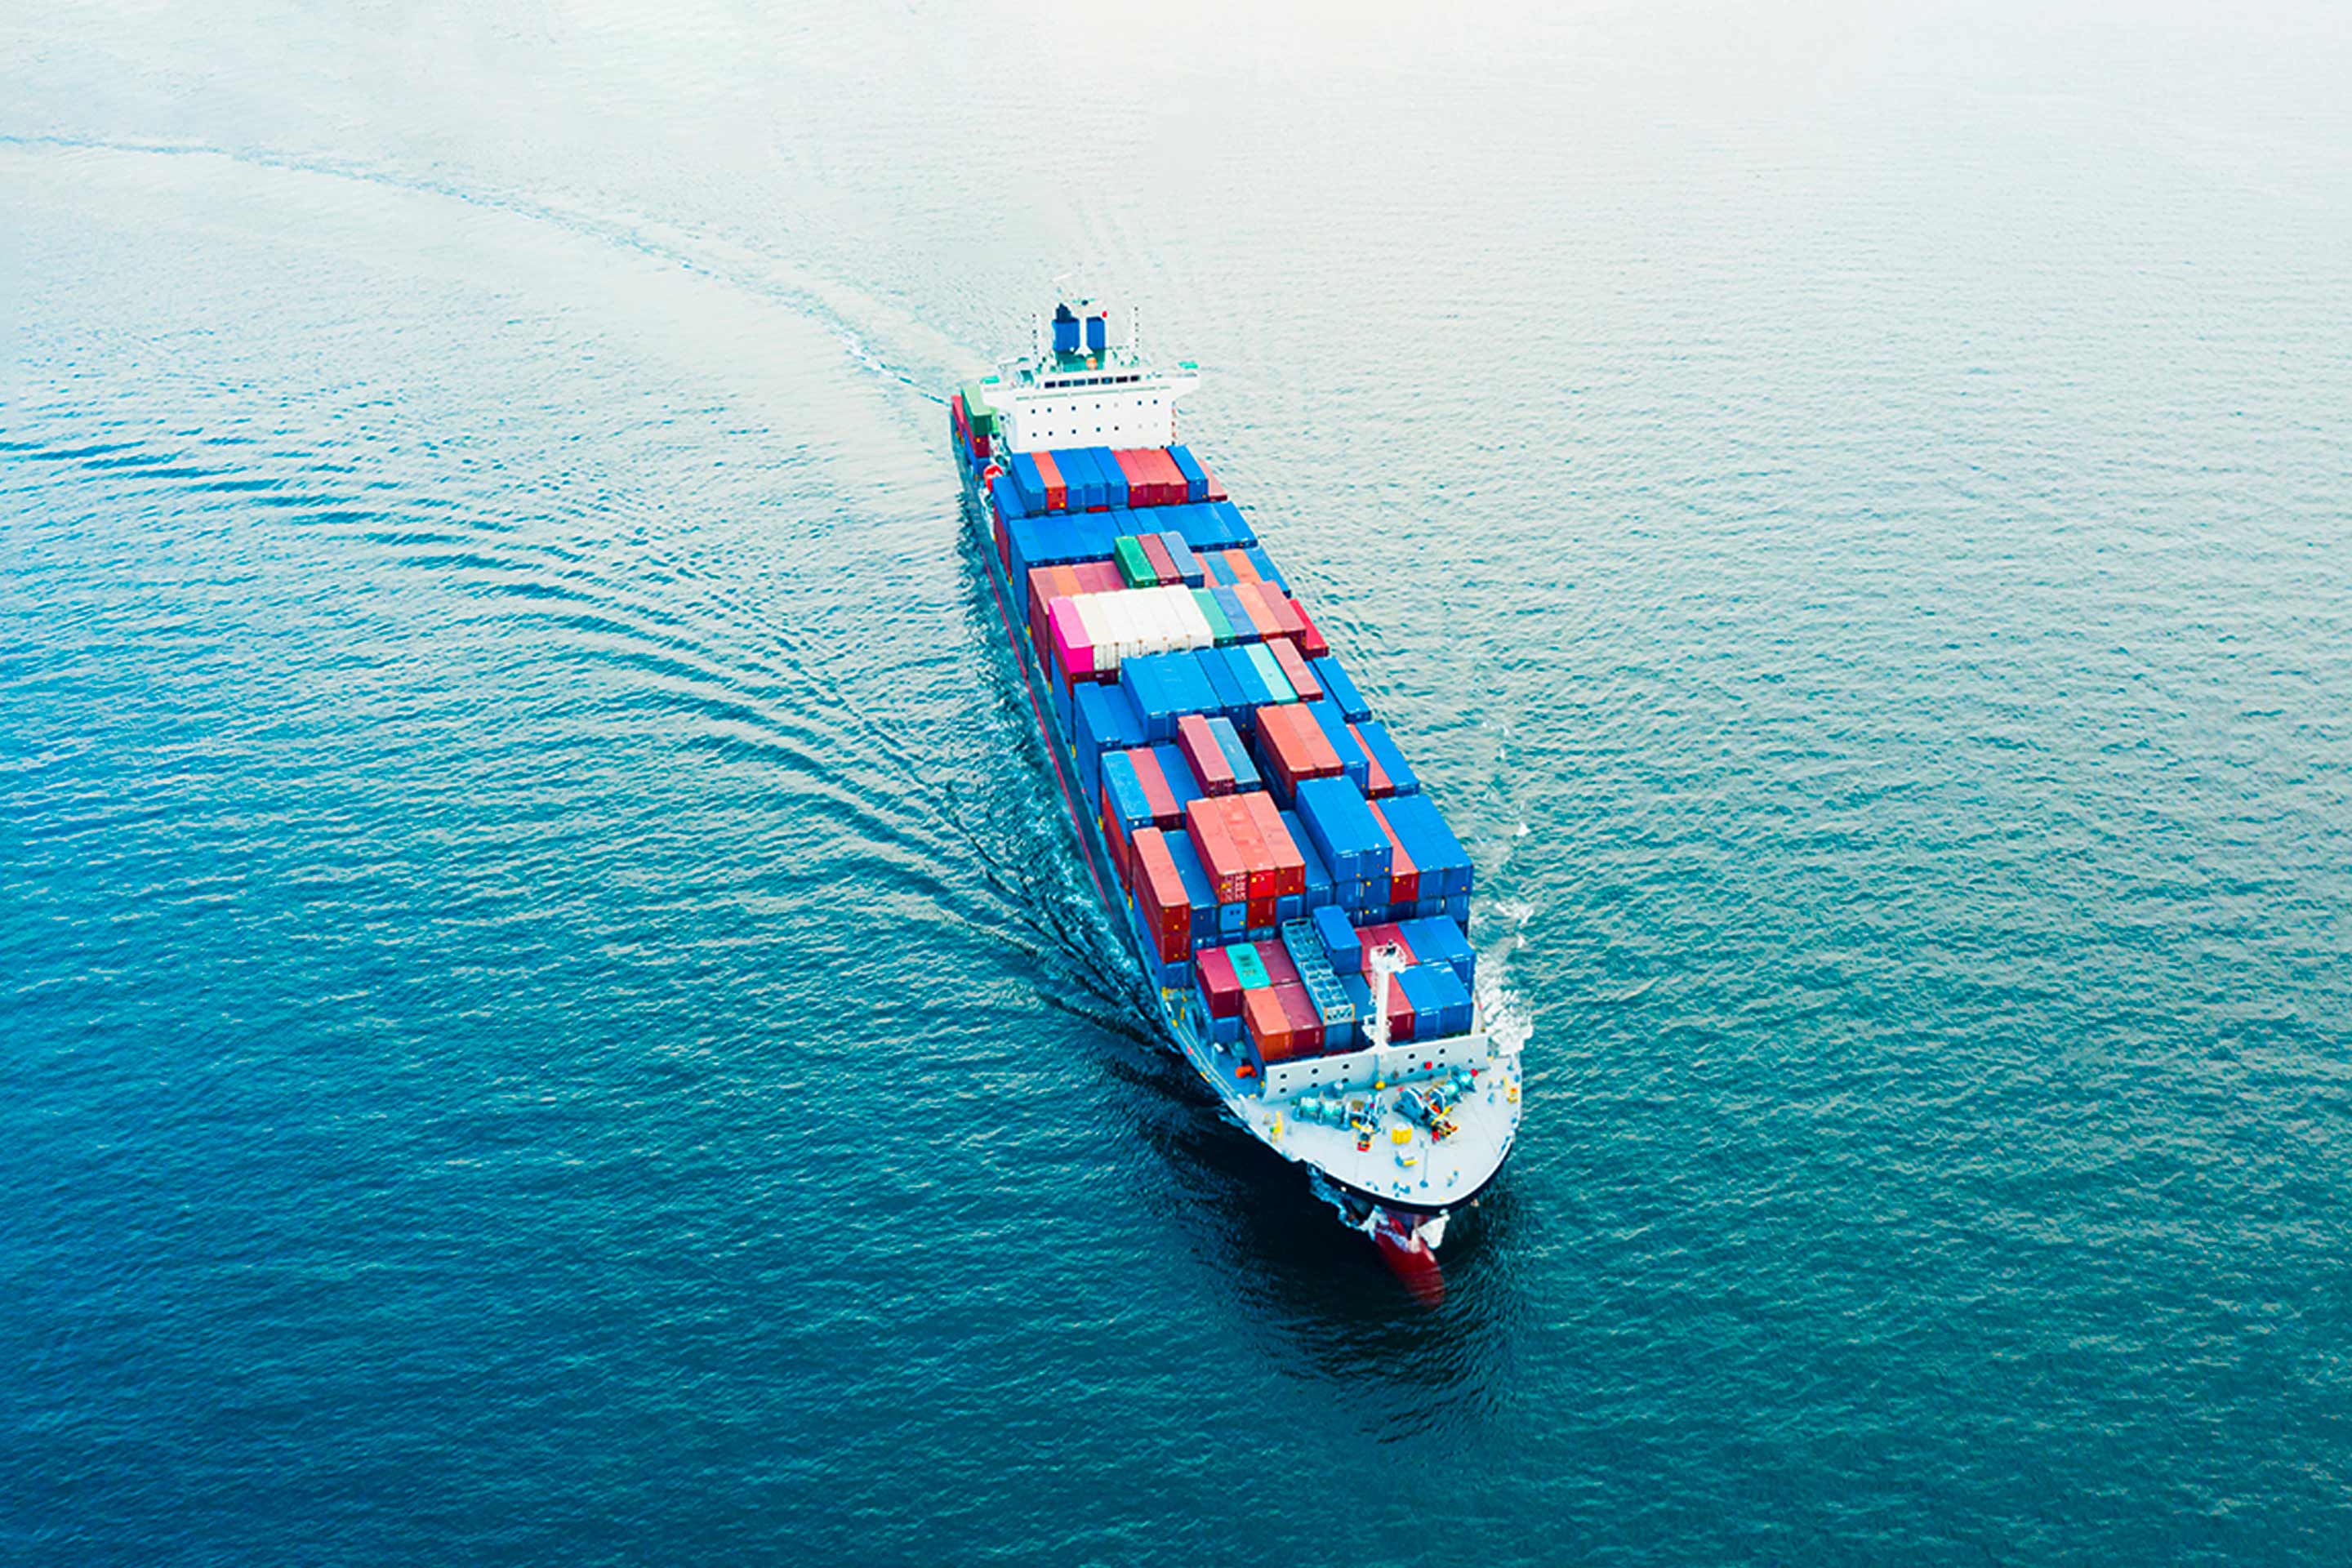 An image of a container ship at sea to represent OMT interview